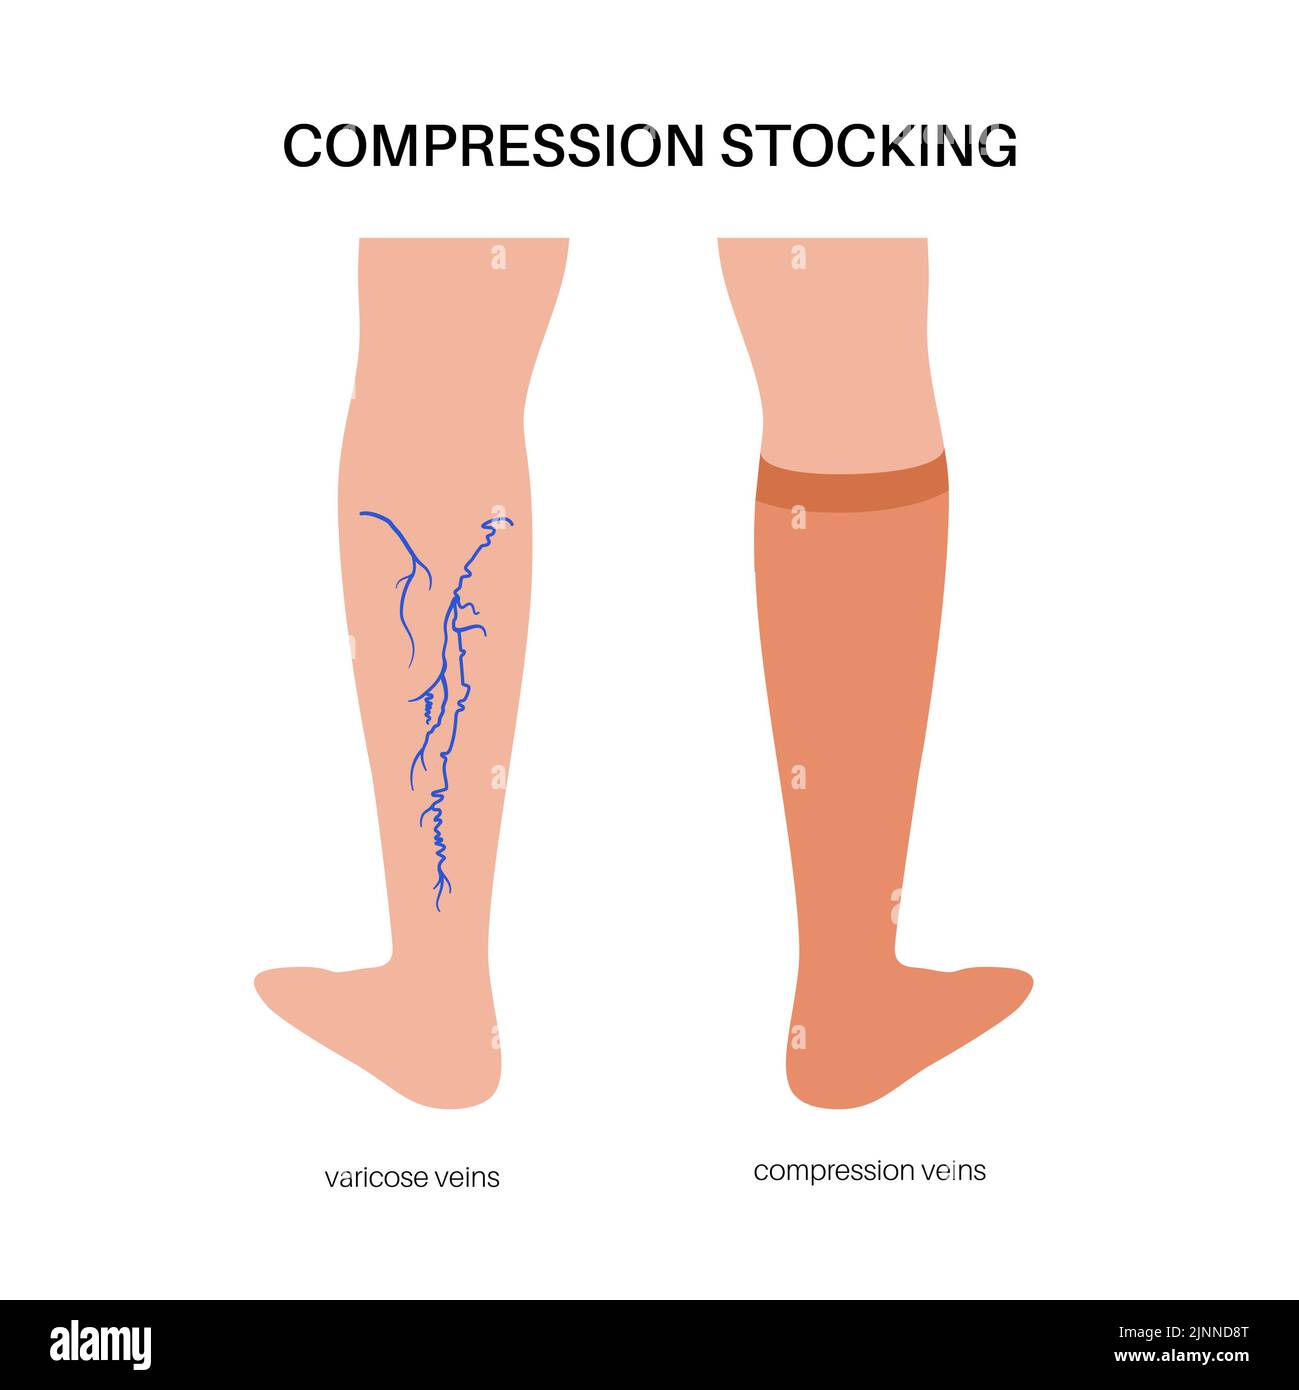 Compression stockings for varicose veins, illustration Stock Photo